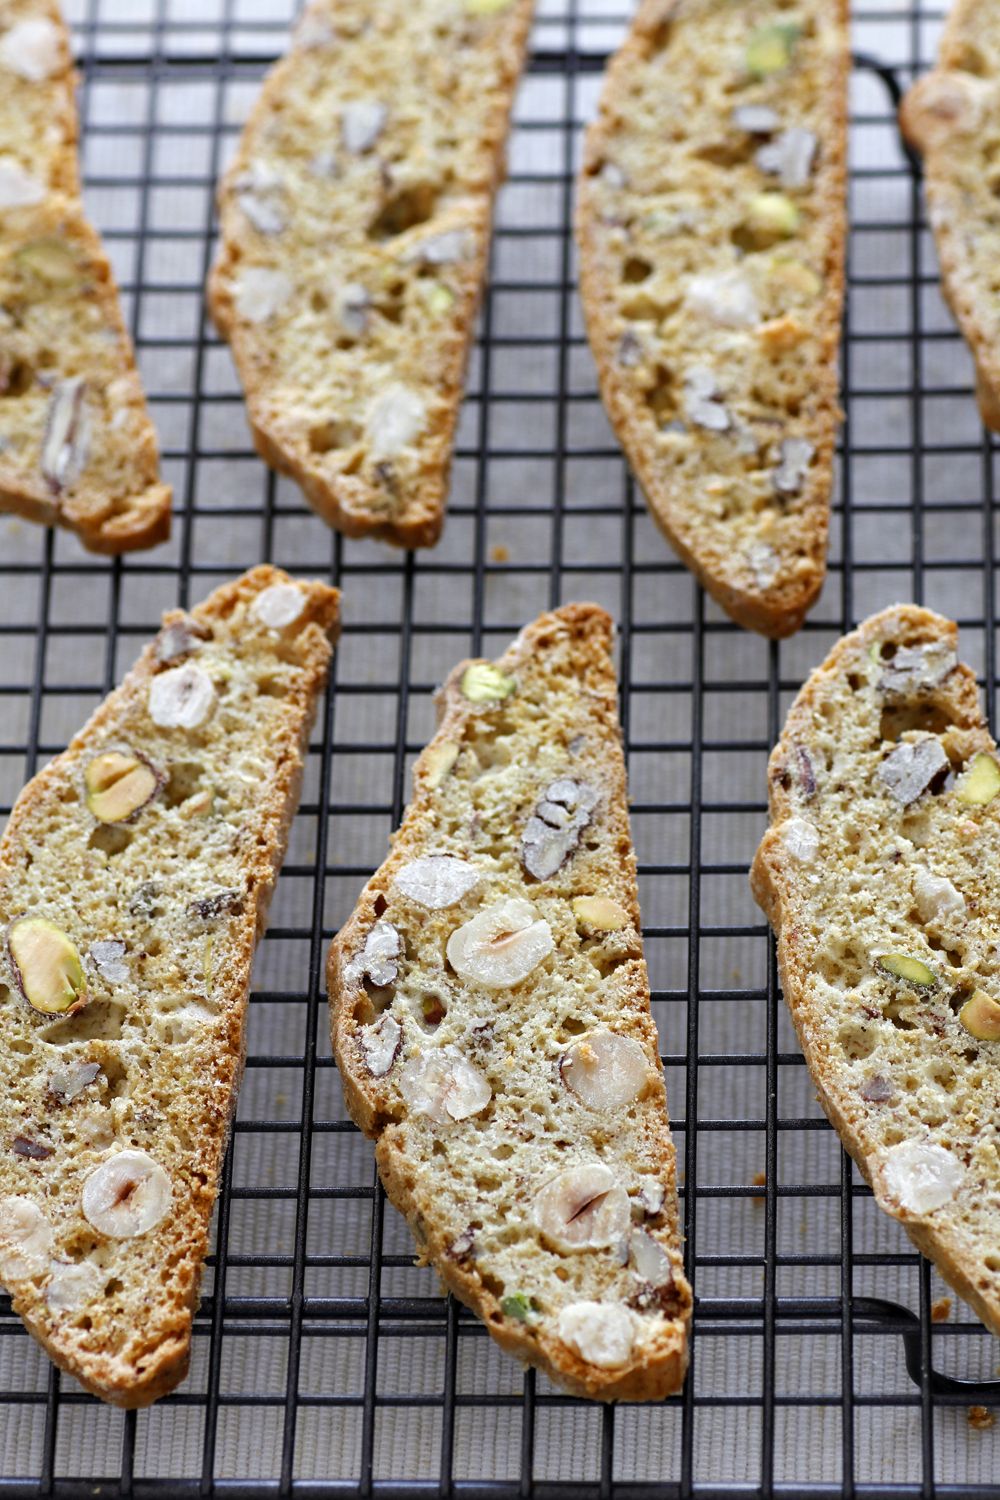 Biscotti Cookies with Hazelnuts, Pecans and Pistachios